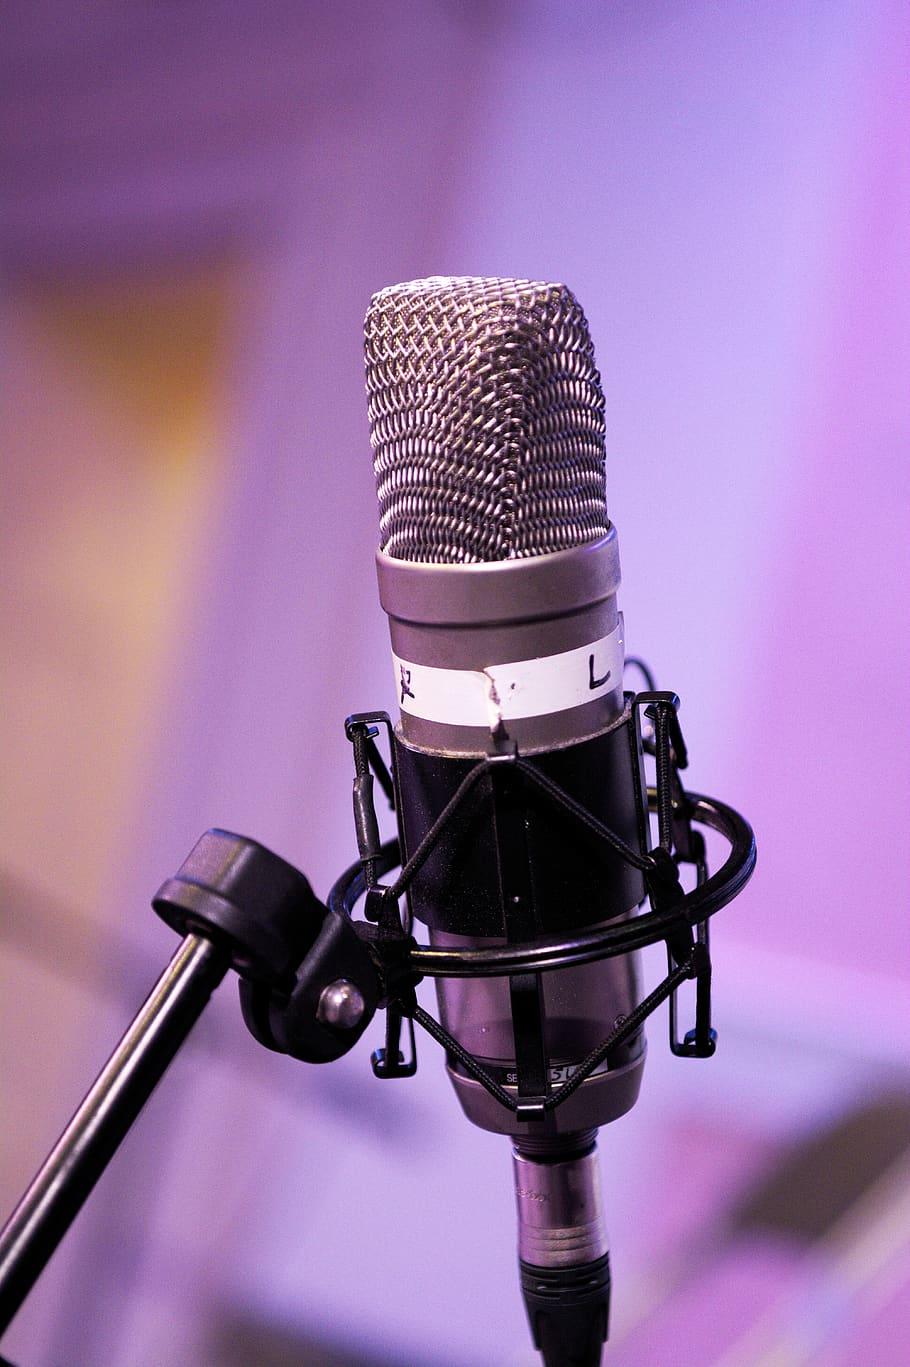 HD wallpaper: mic, podcast, microphone, broadcasting, communication, podcasting